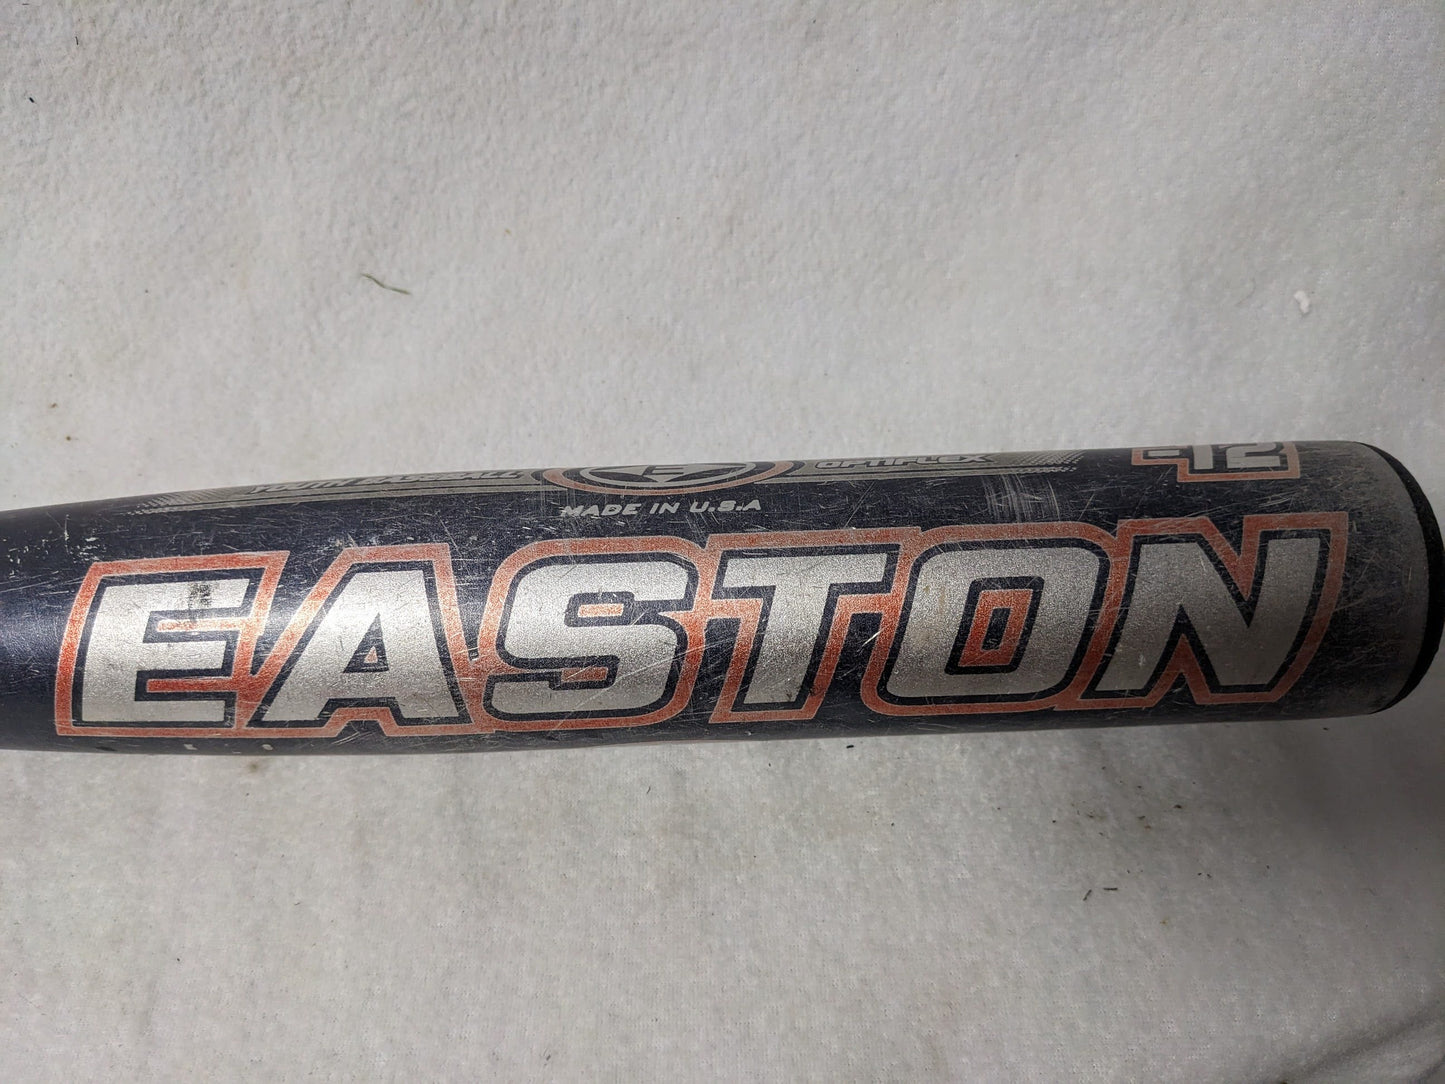 Easton SC888 Baseball Bat Size 29 In 17 Oz Color Silver Condition Used